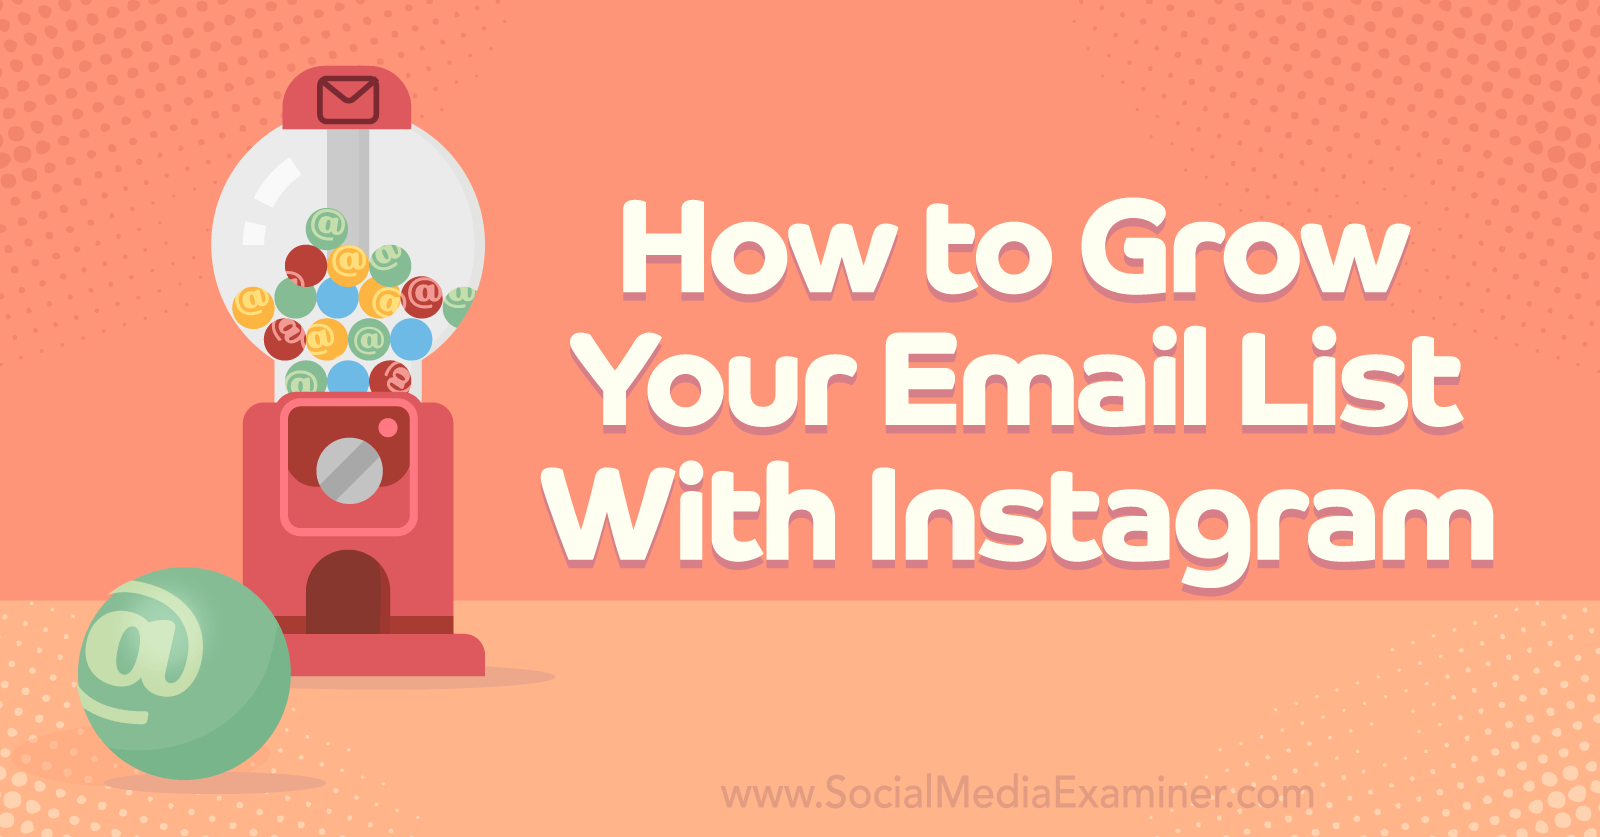 How to Grow Your Email List With Instagram-Social Media Examiner